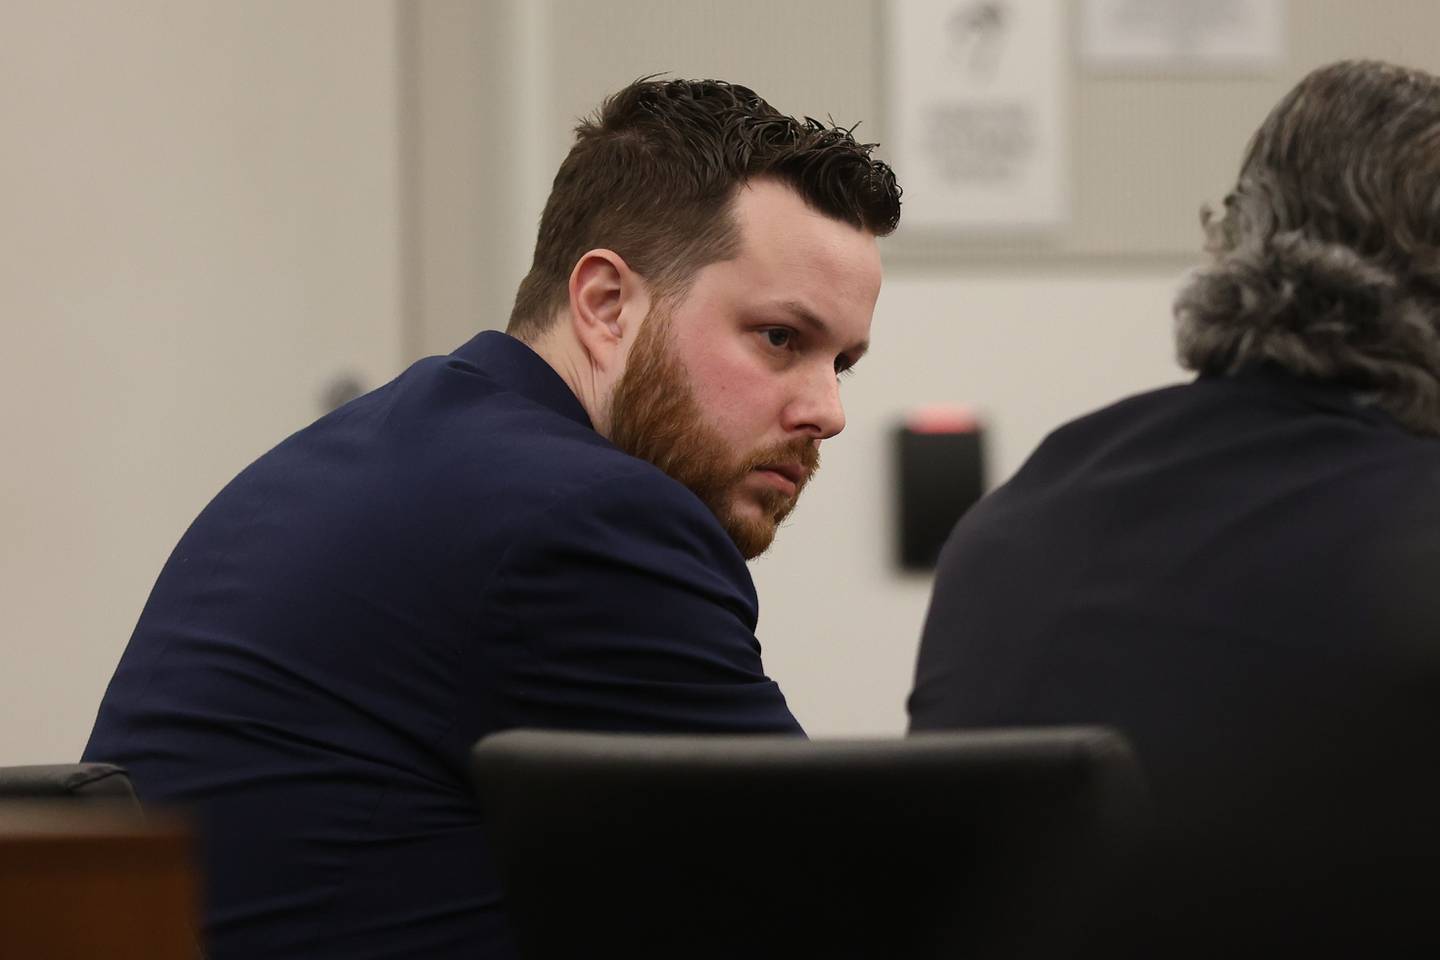 Defendant Sean Woulfe looks to his lawyer during closing arguments on Monday at the Will County Courthouse. Sean Woulfe, 29, is charge with reckless homicide of Lindsey Schmidt, 29, and her three sons, Owen, 6, Weston, 4, and Kaleb, 1. Monday, Mar. 28, 2022, in Joliet.